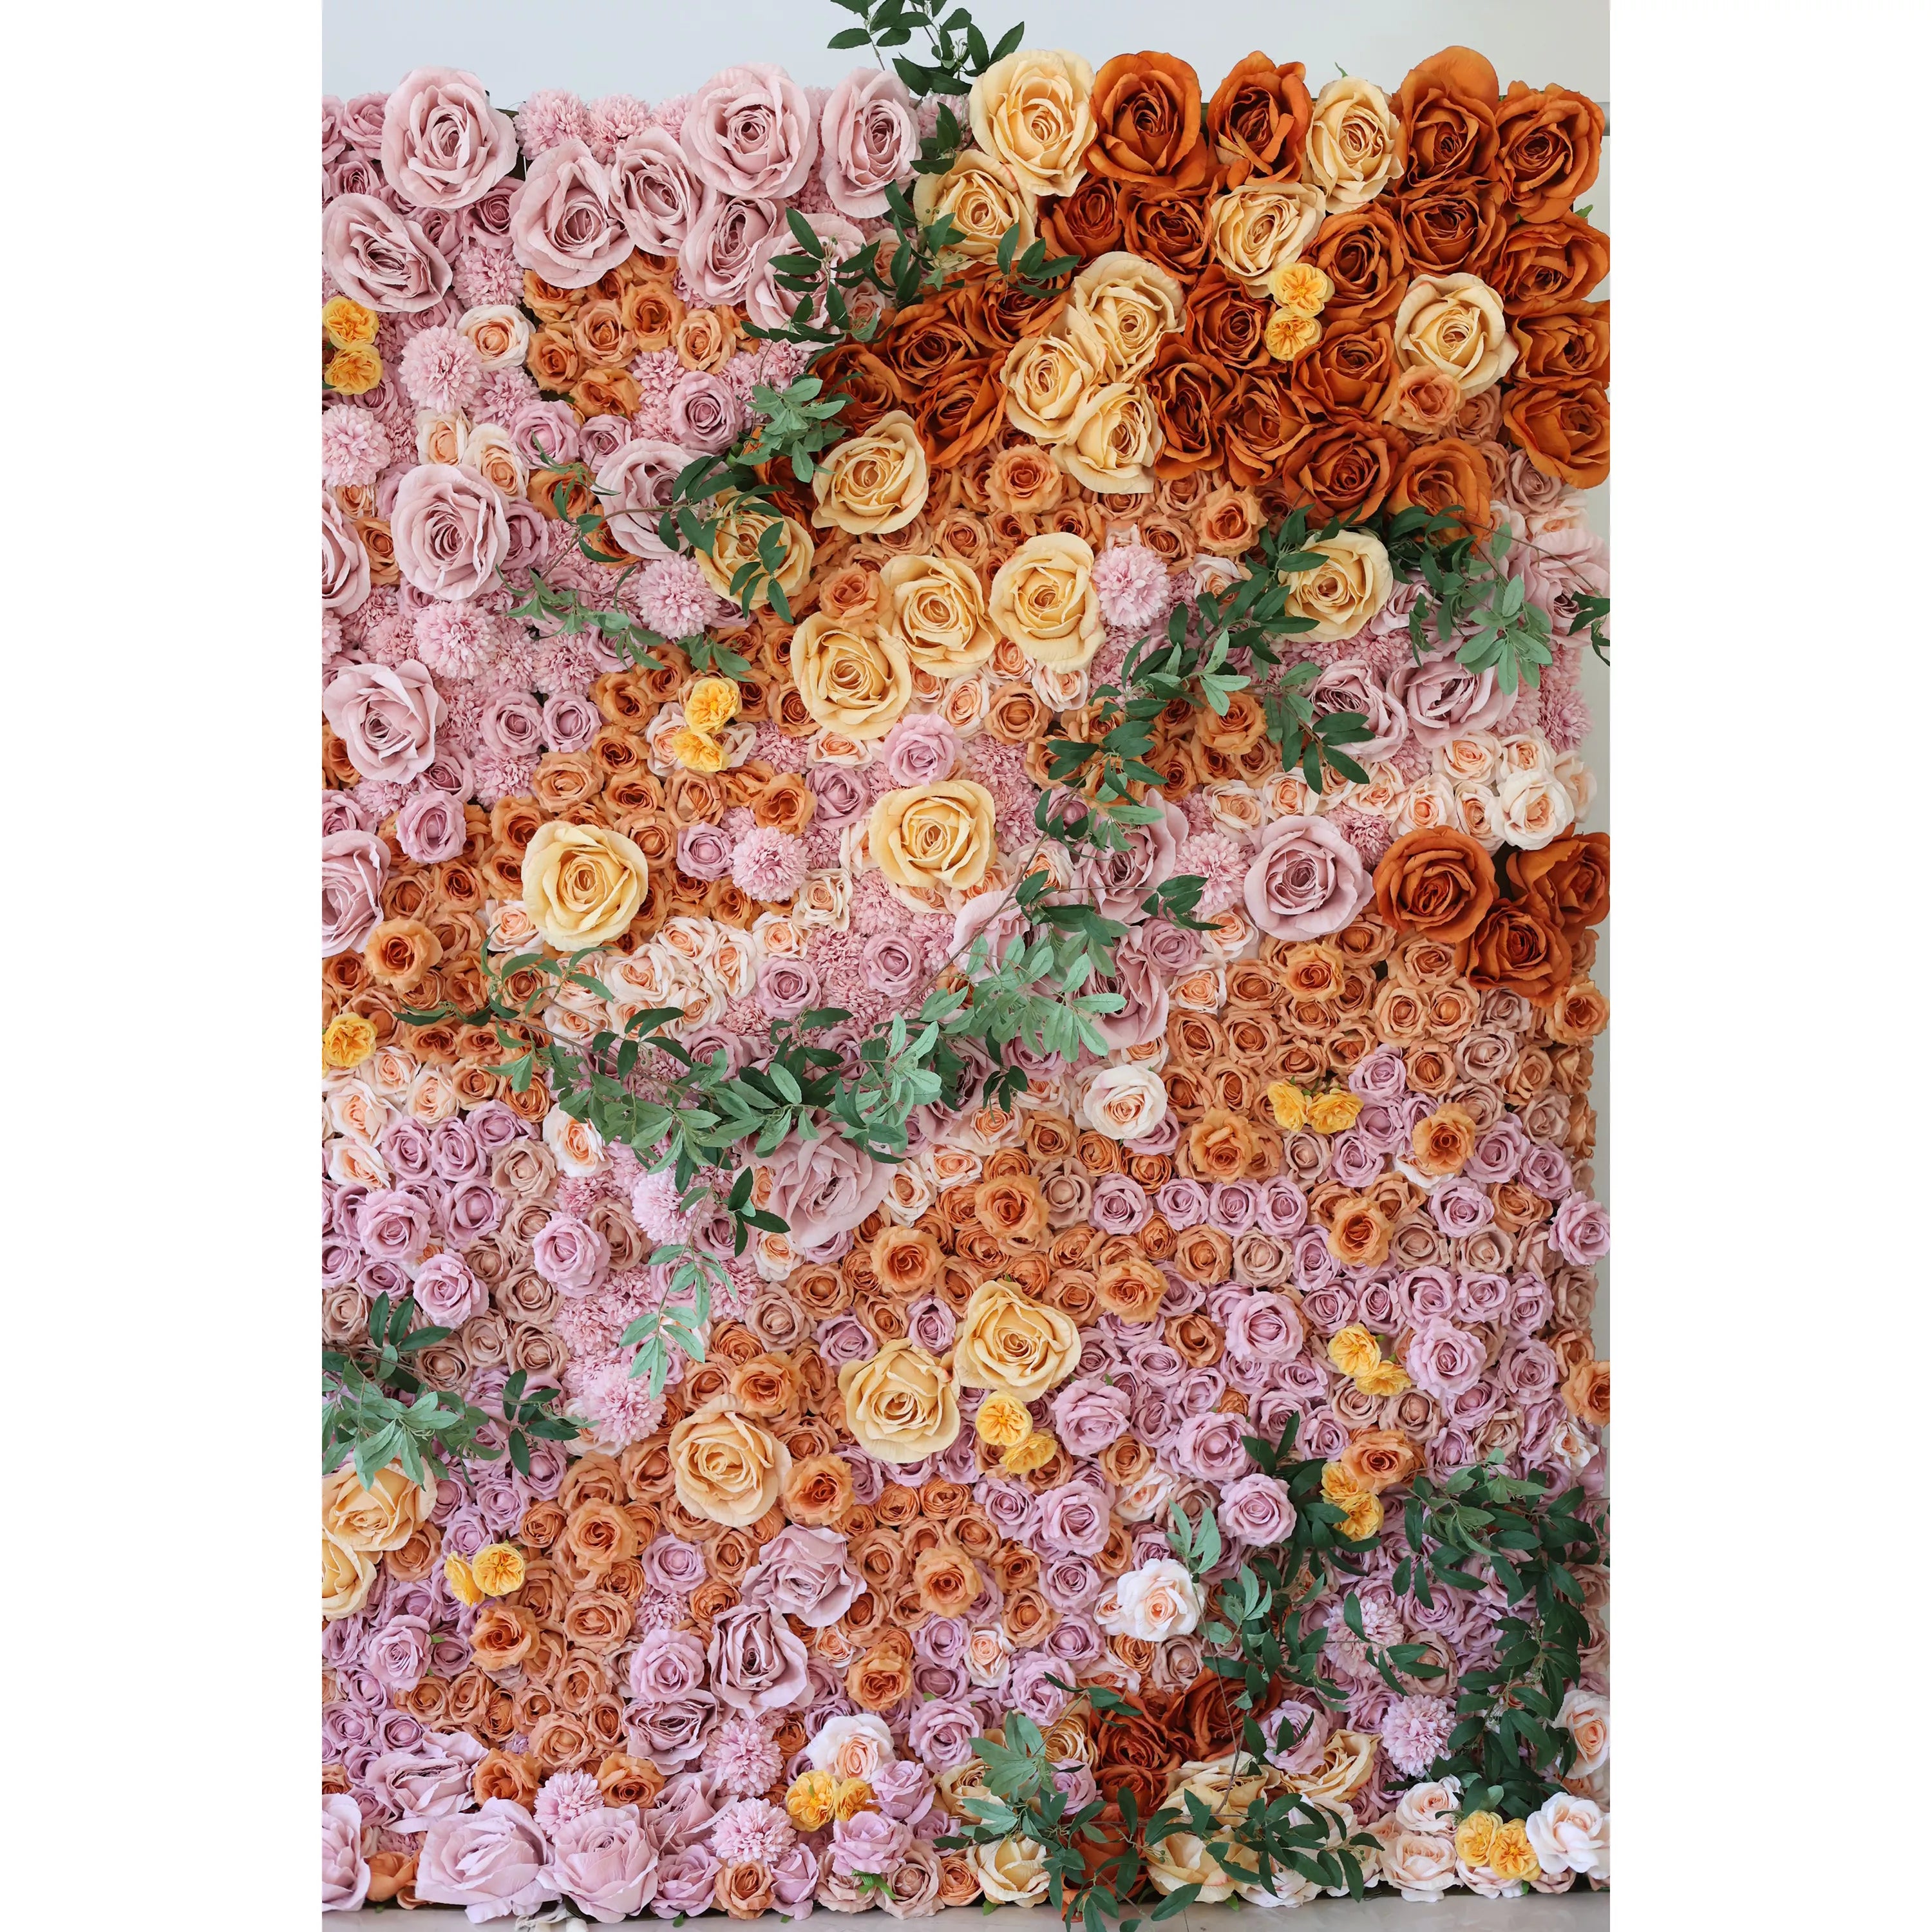 ValarFlowers lush pink floral wall, boasting a rich blend of roses in warm hues. Ideal for spa settings or events, it offers a touch of elegance and nature-inspired tranquility. A must-have backdrop for any luxurious setting.